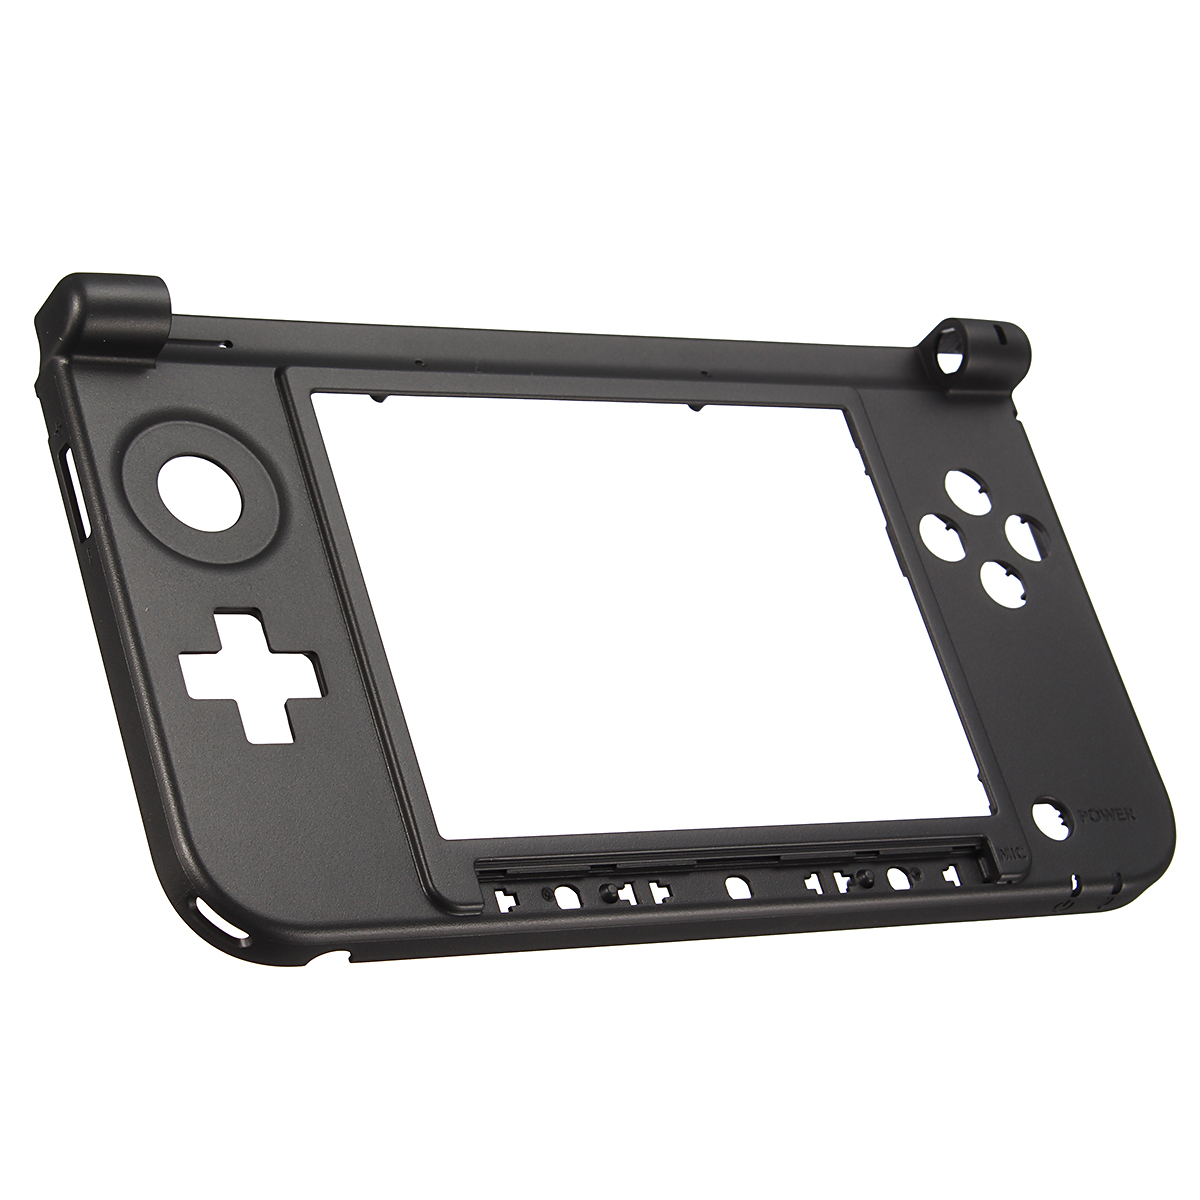 Replacement Bottom Middle Frame Housing Shell Cover Case for Nintendo 3DS XL 3DS LL Game Console 52